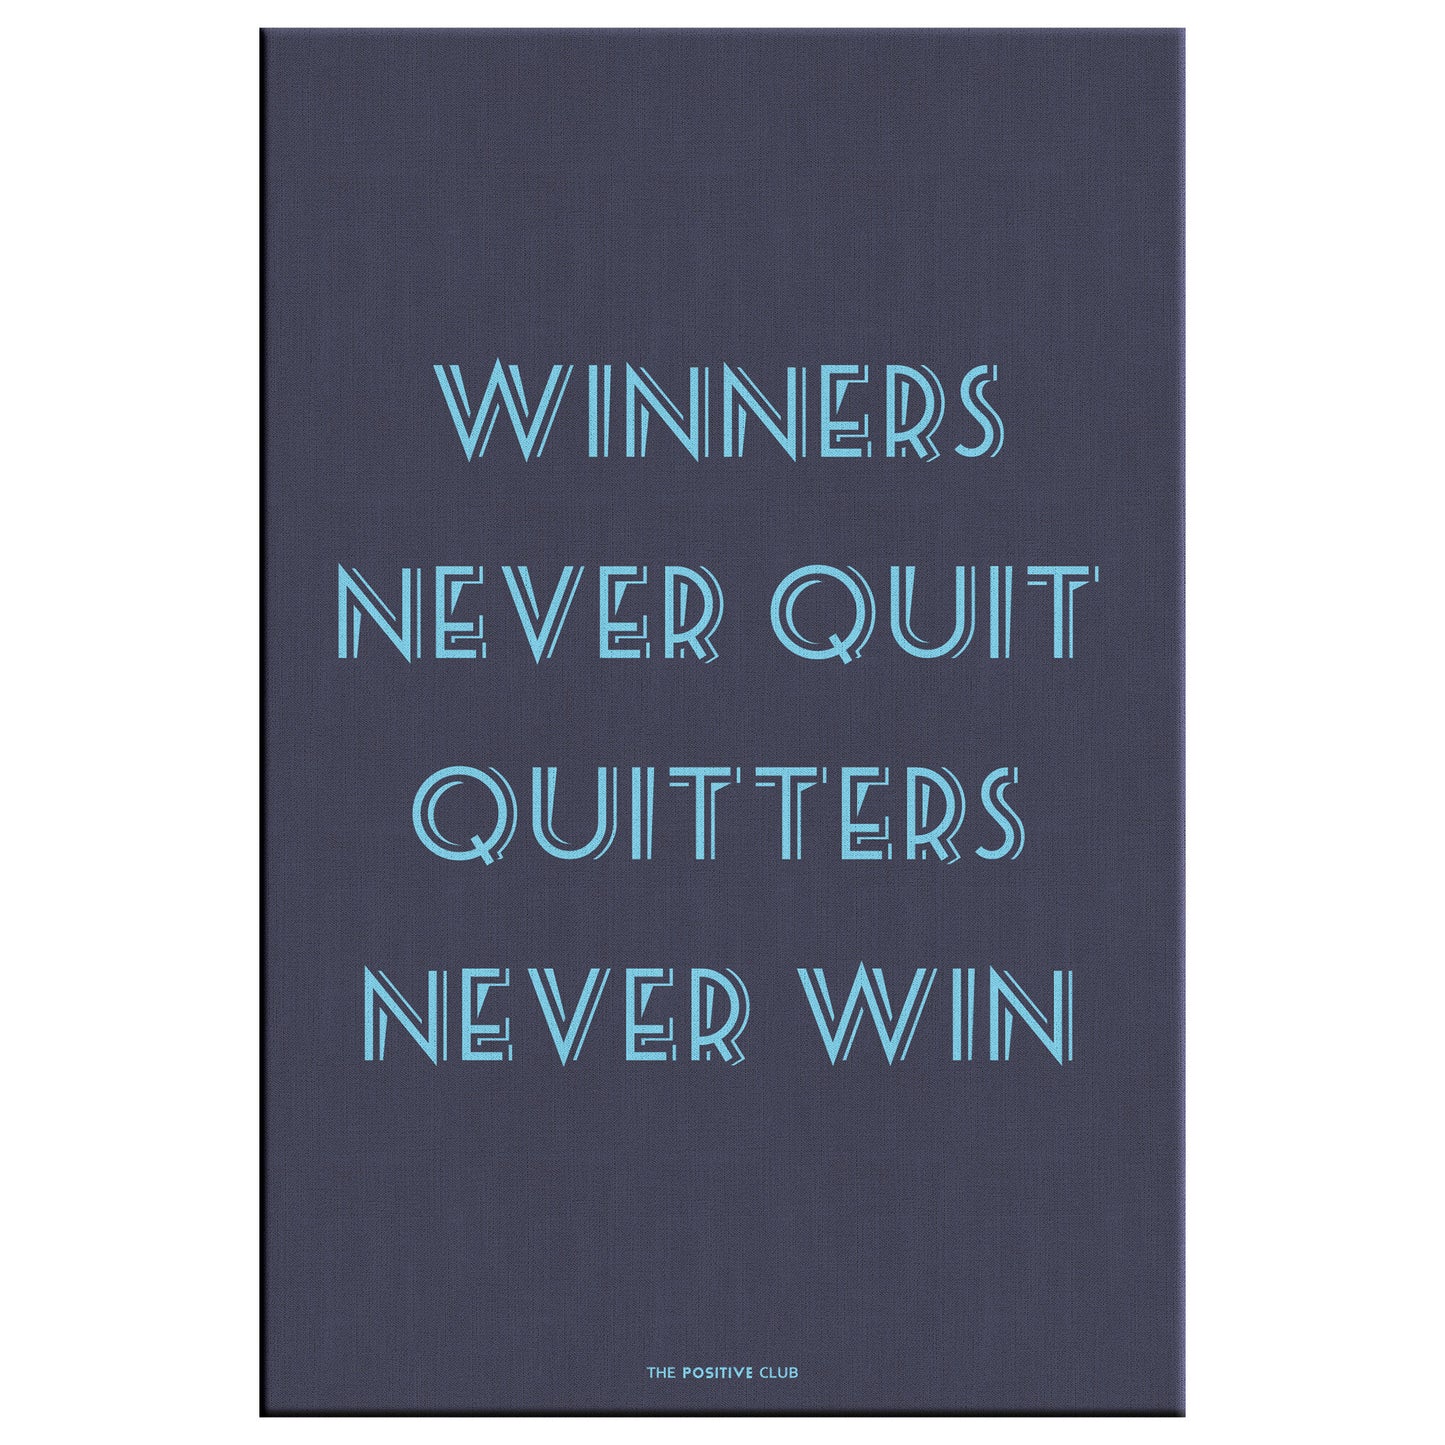 WINNERS NEVER QUIT QUITTERS NEVER WIN